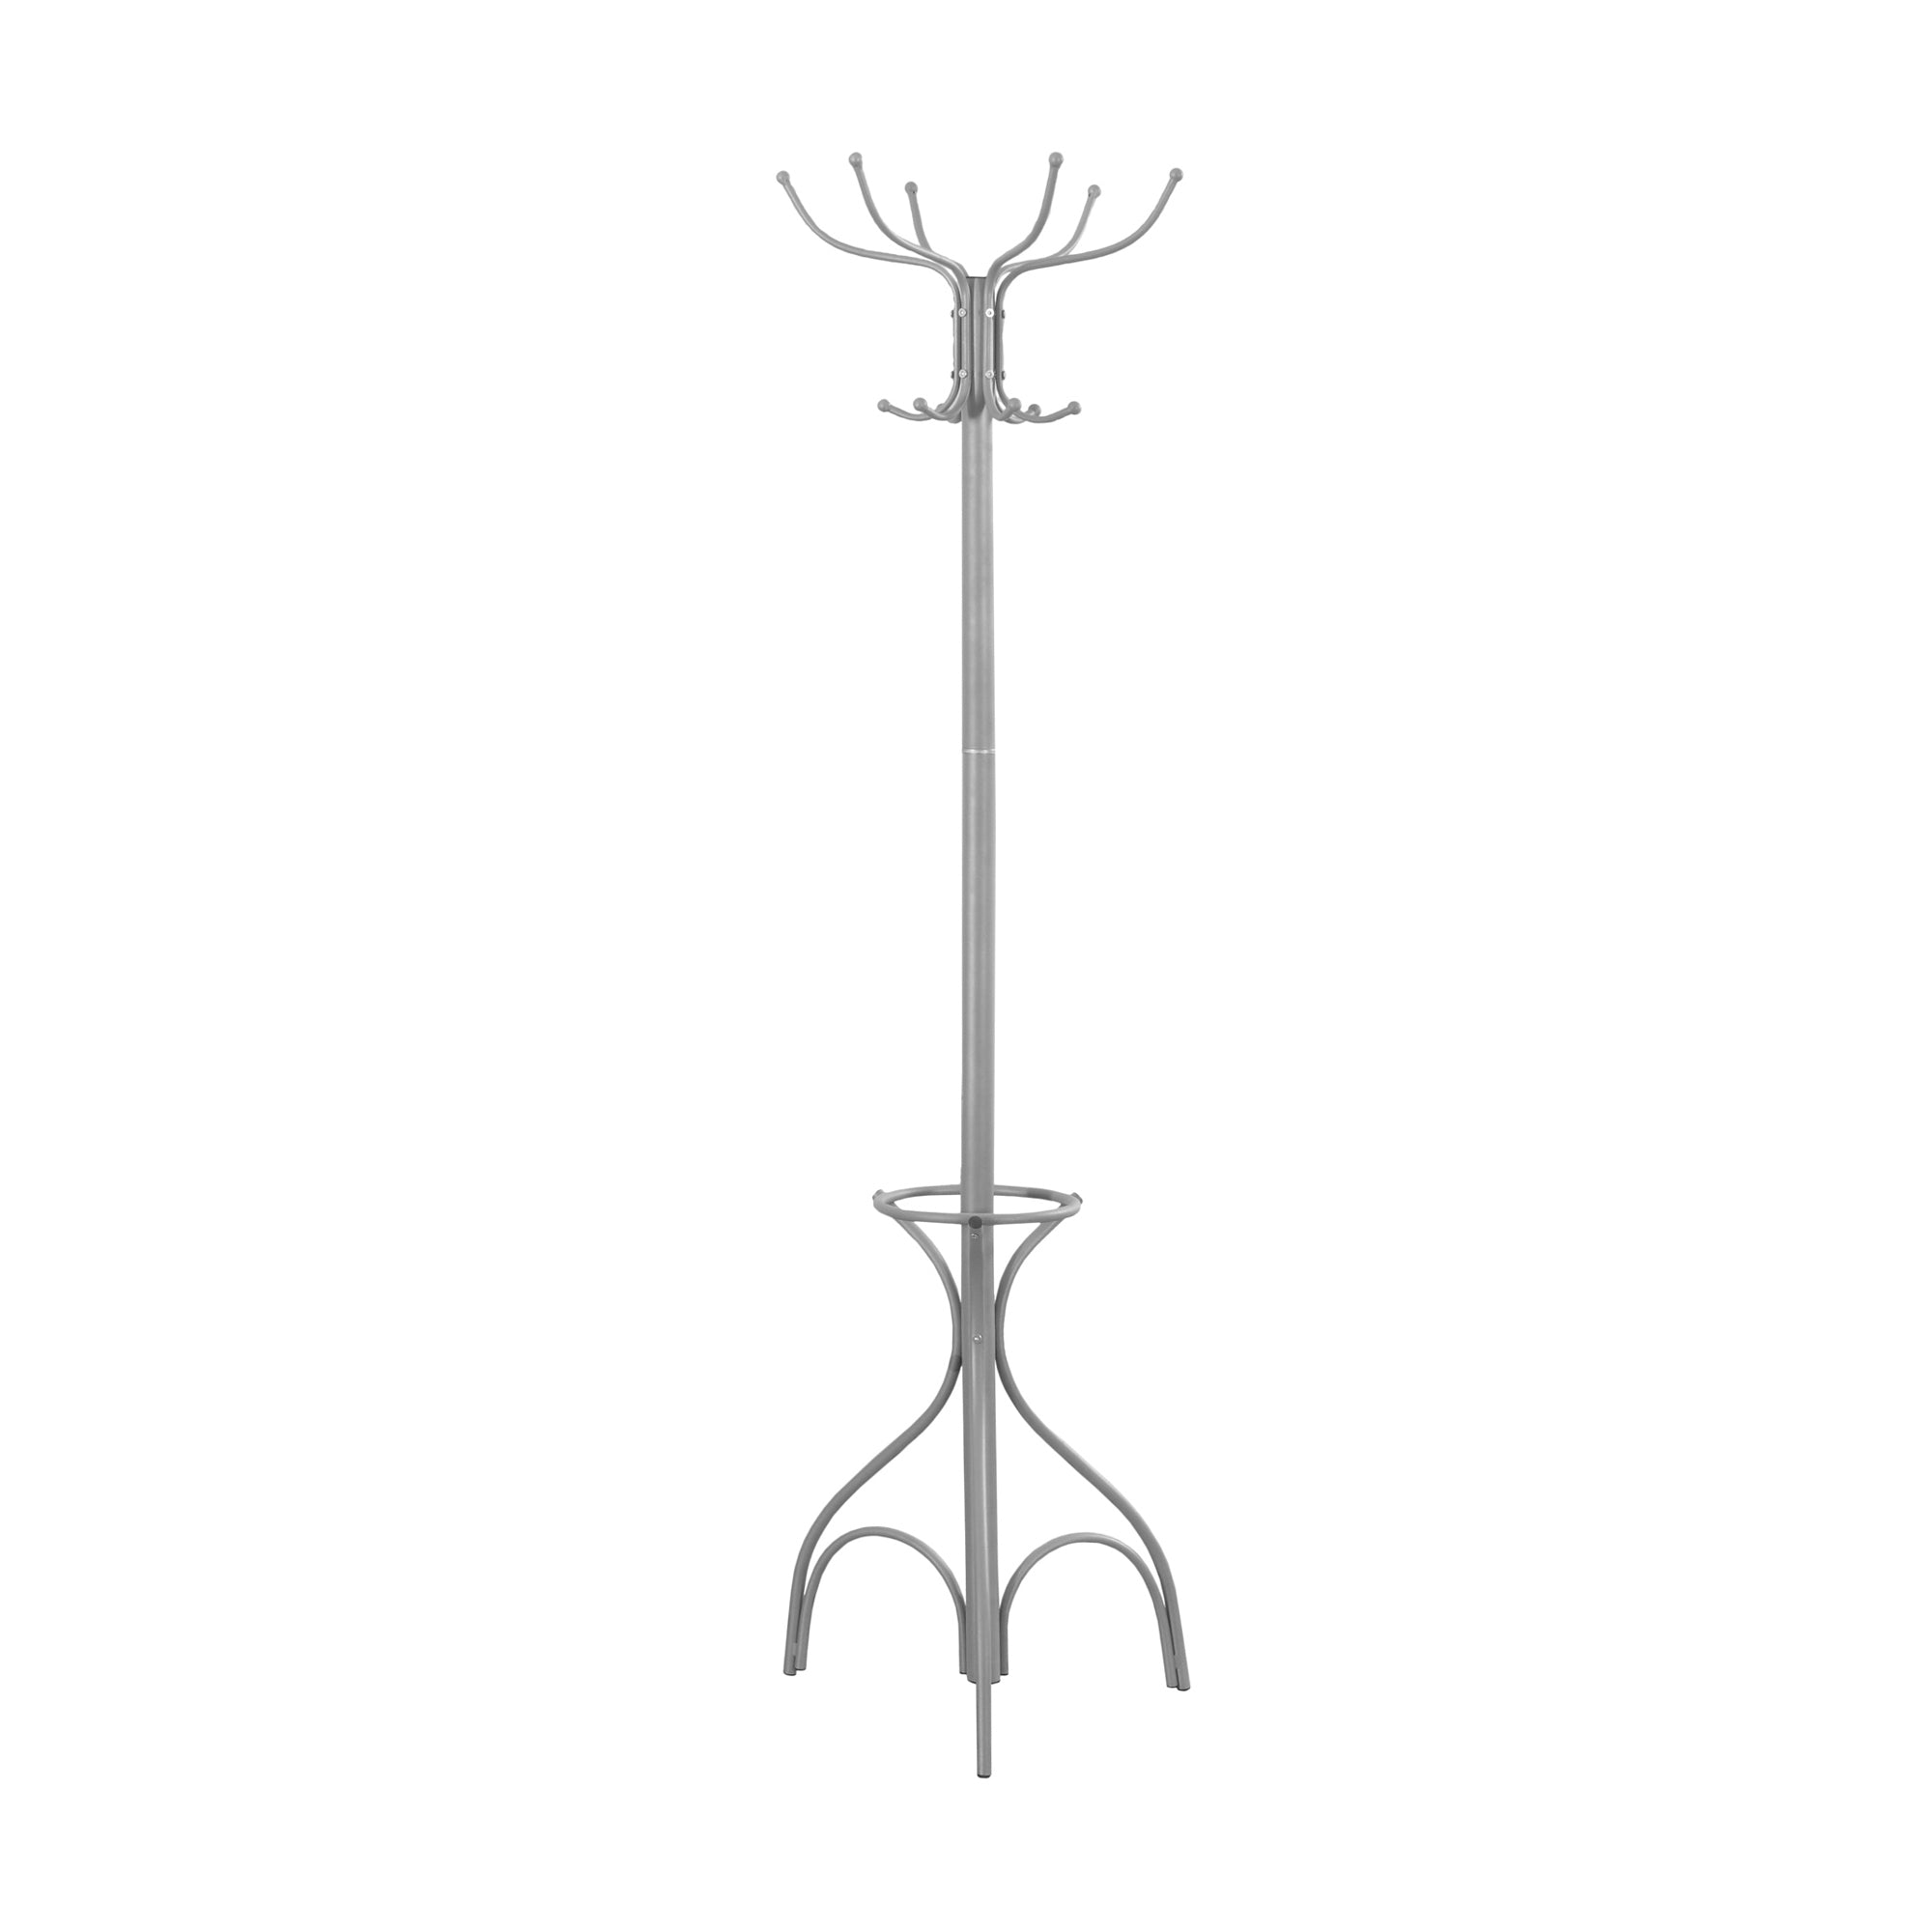 COAT RACK - 70"H / WHITE METAL WITH AN UMBRELLA HOLDER